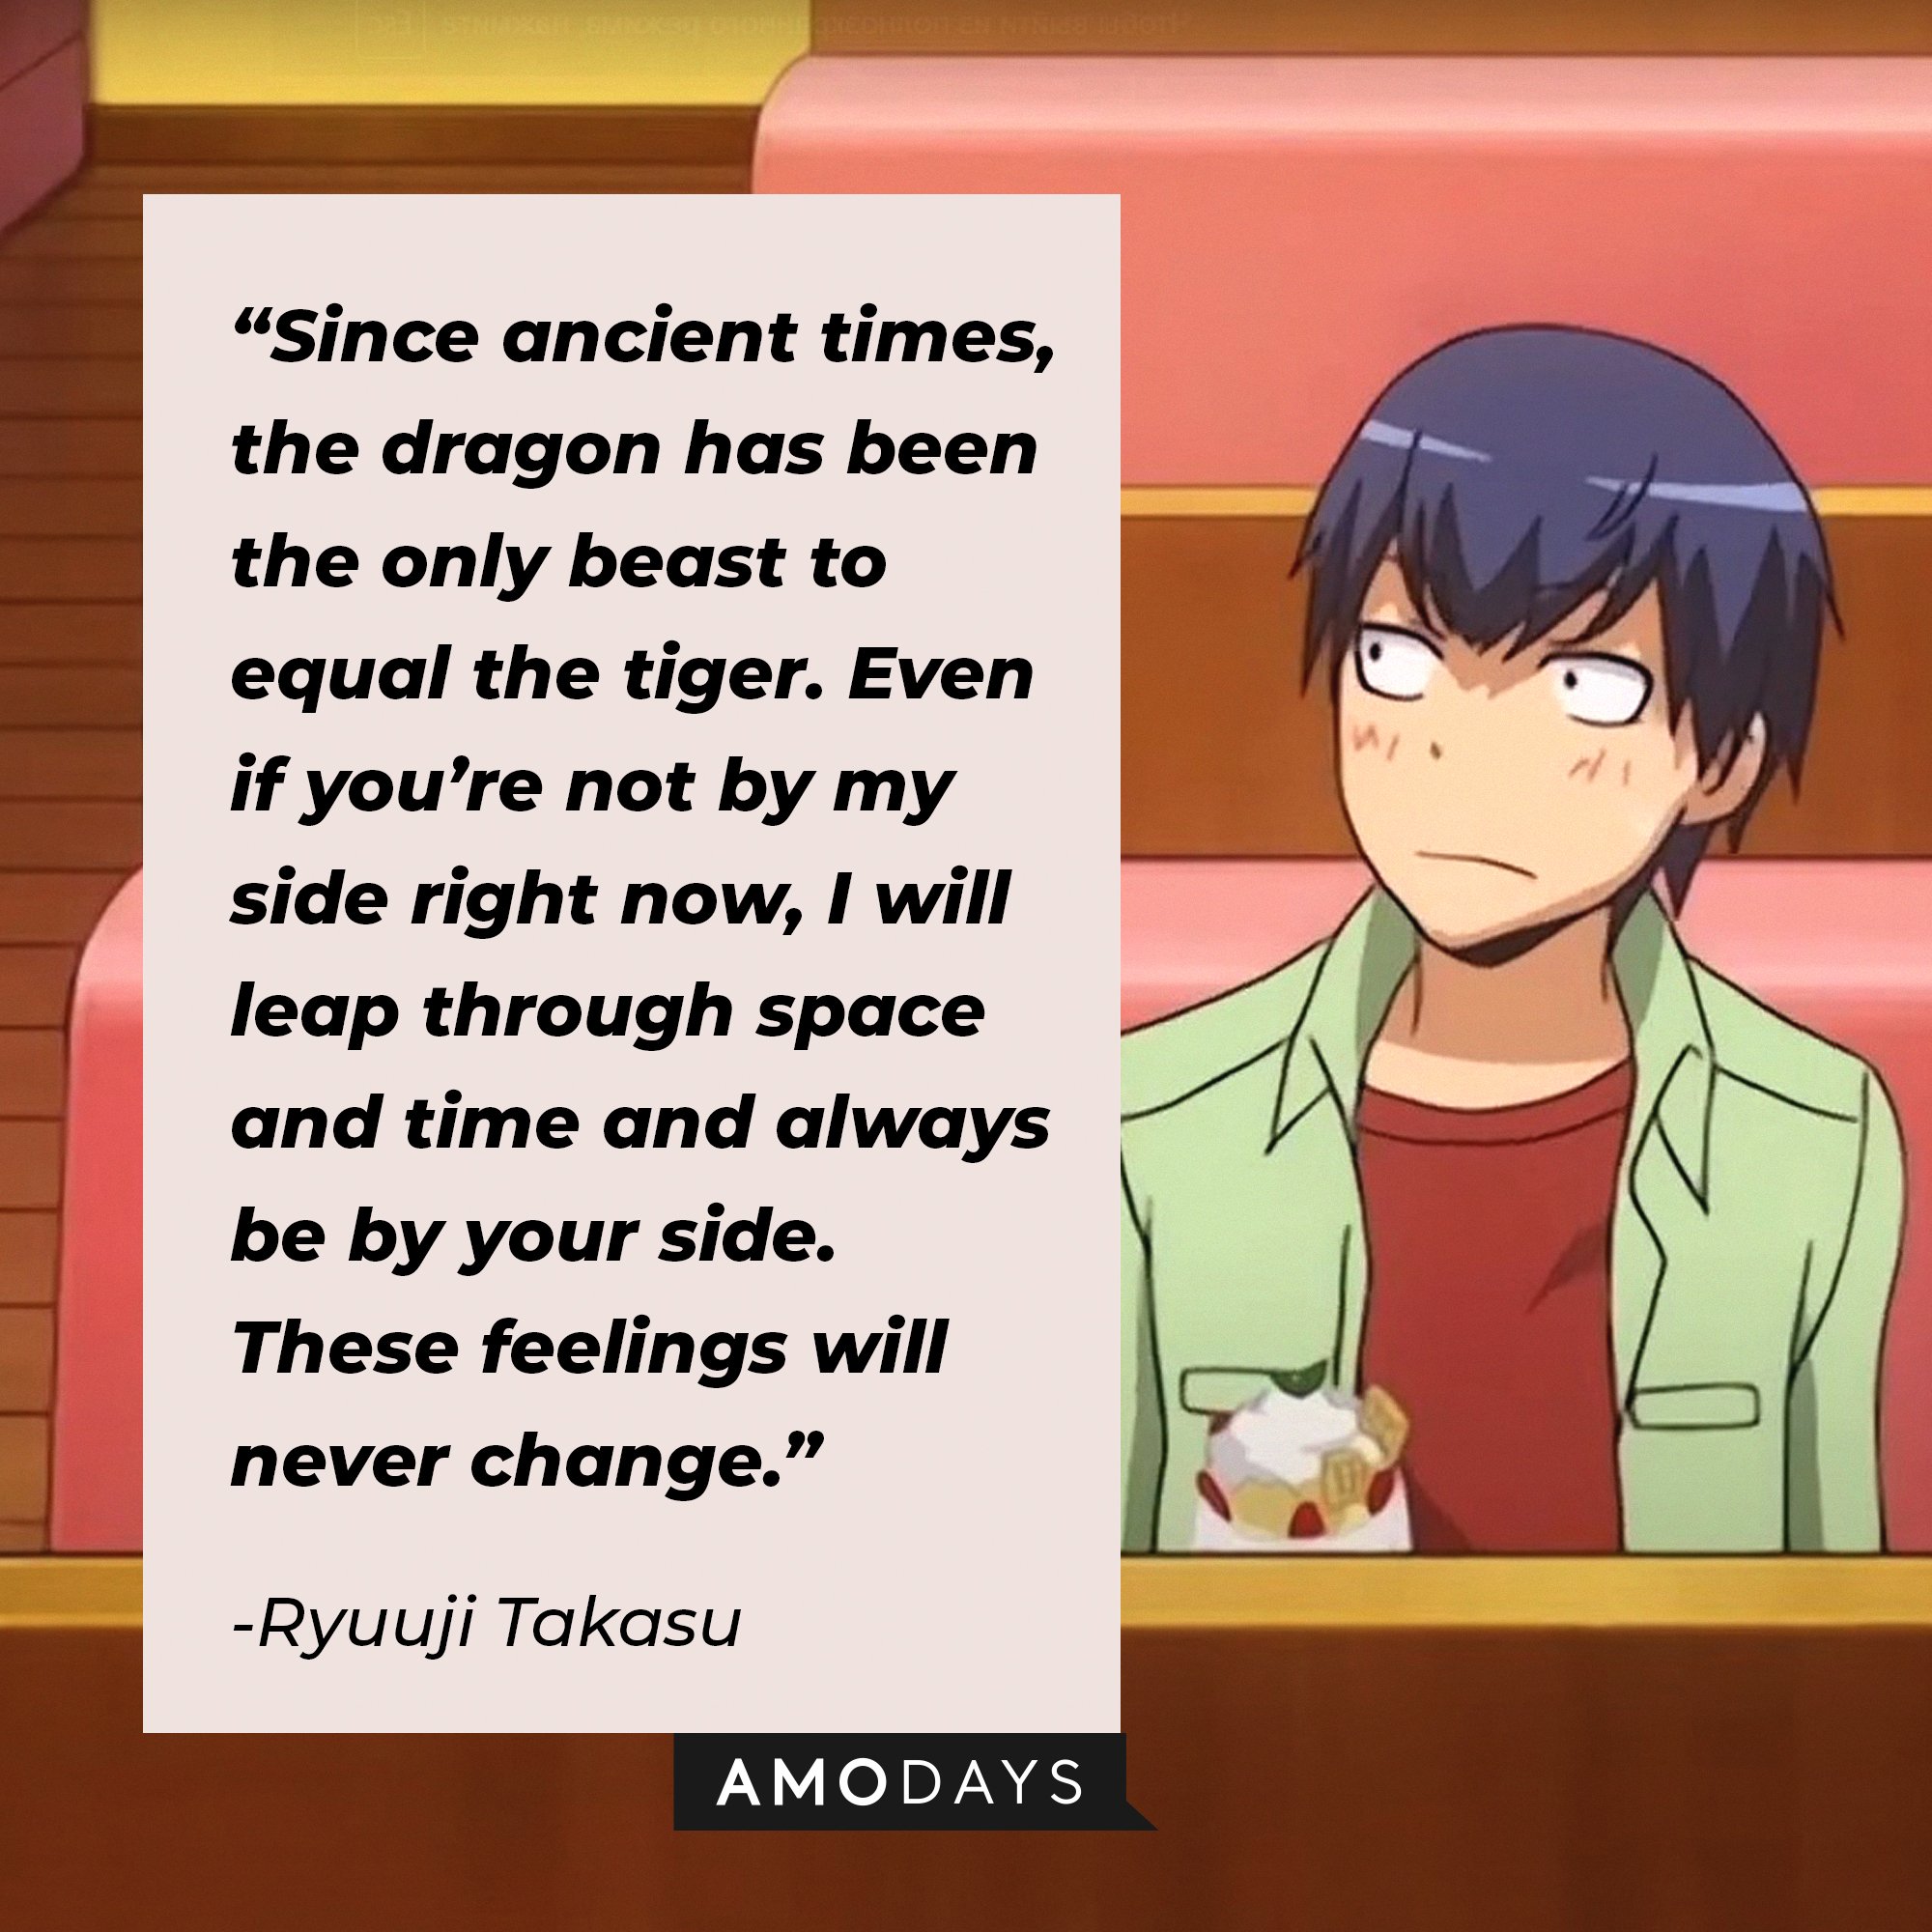 Ryuuji Takasu’s quote: “Since ancient times, the dragon has been the only beast to equal the tiger. Even if you’re not by my side right now, I will leap through space and time and always be by your side. These feelings will never change.” | Image: AmoDays